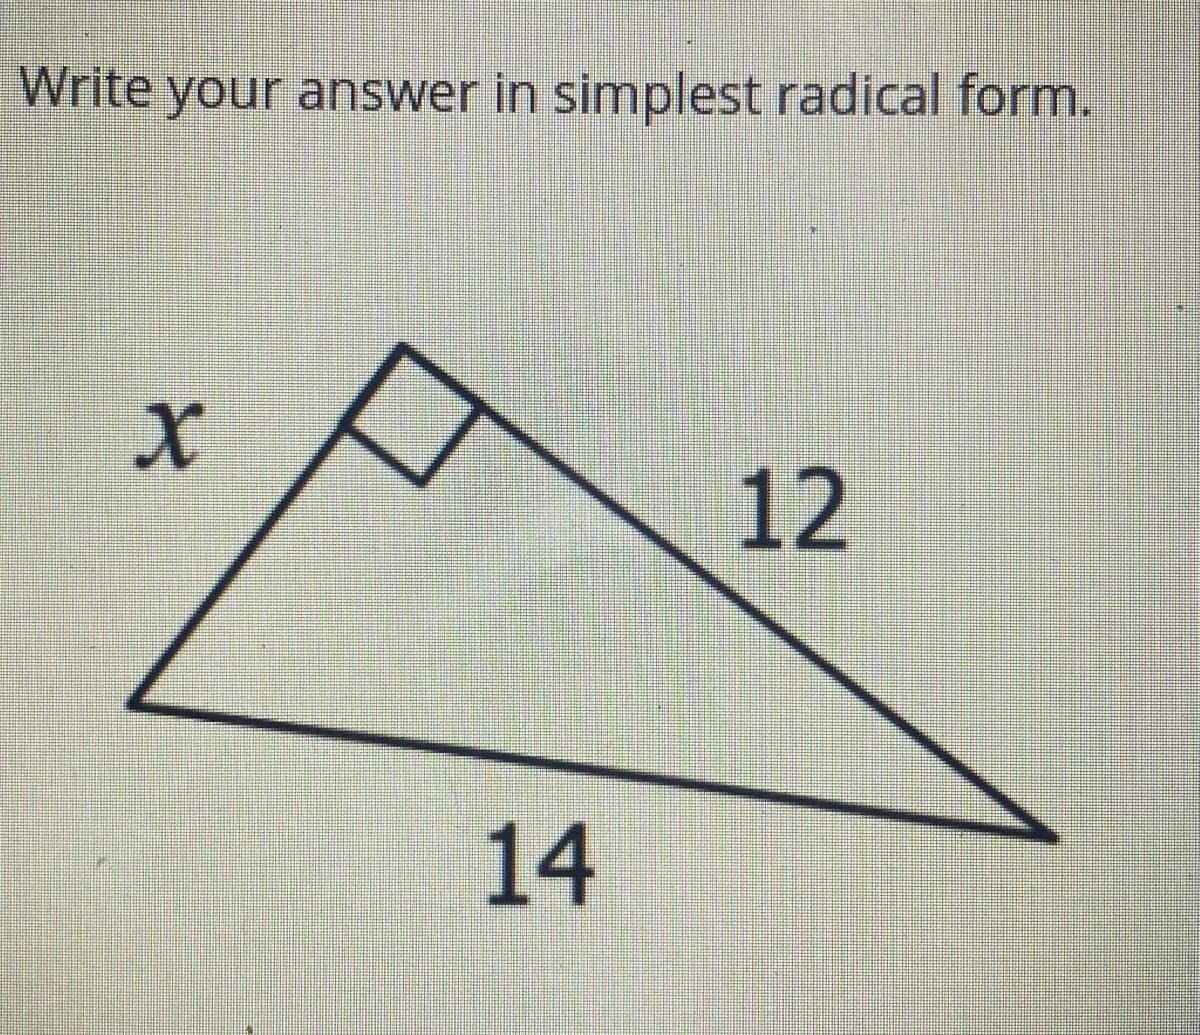 Write your answer in simplest radical form.
12
14
